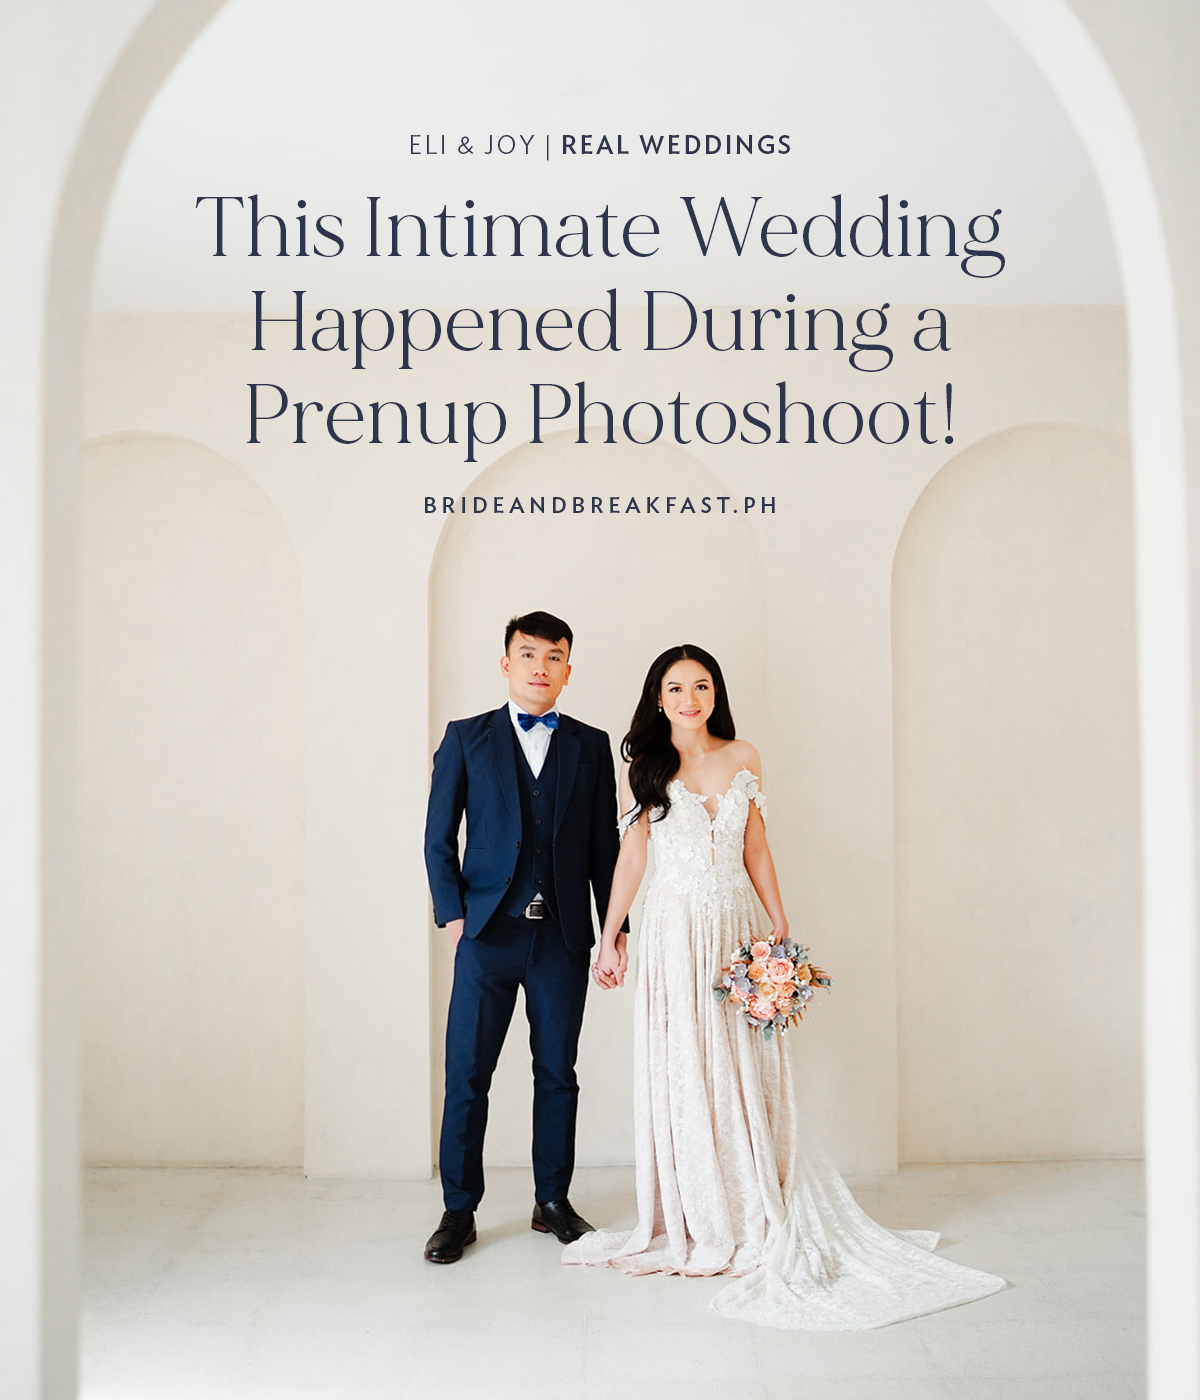 This Intimate Wedding Happened During a Prenup Photoshoot!